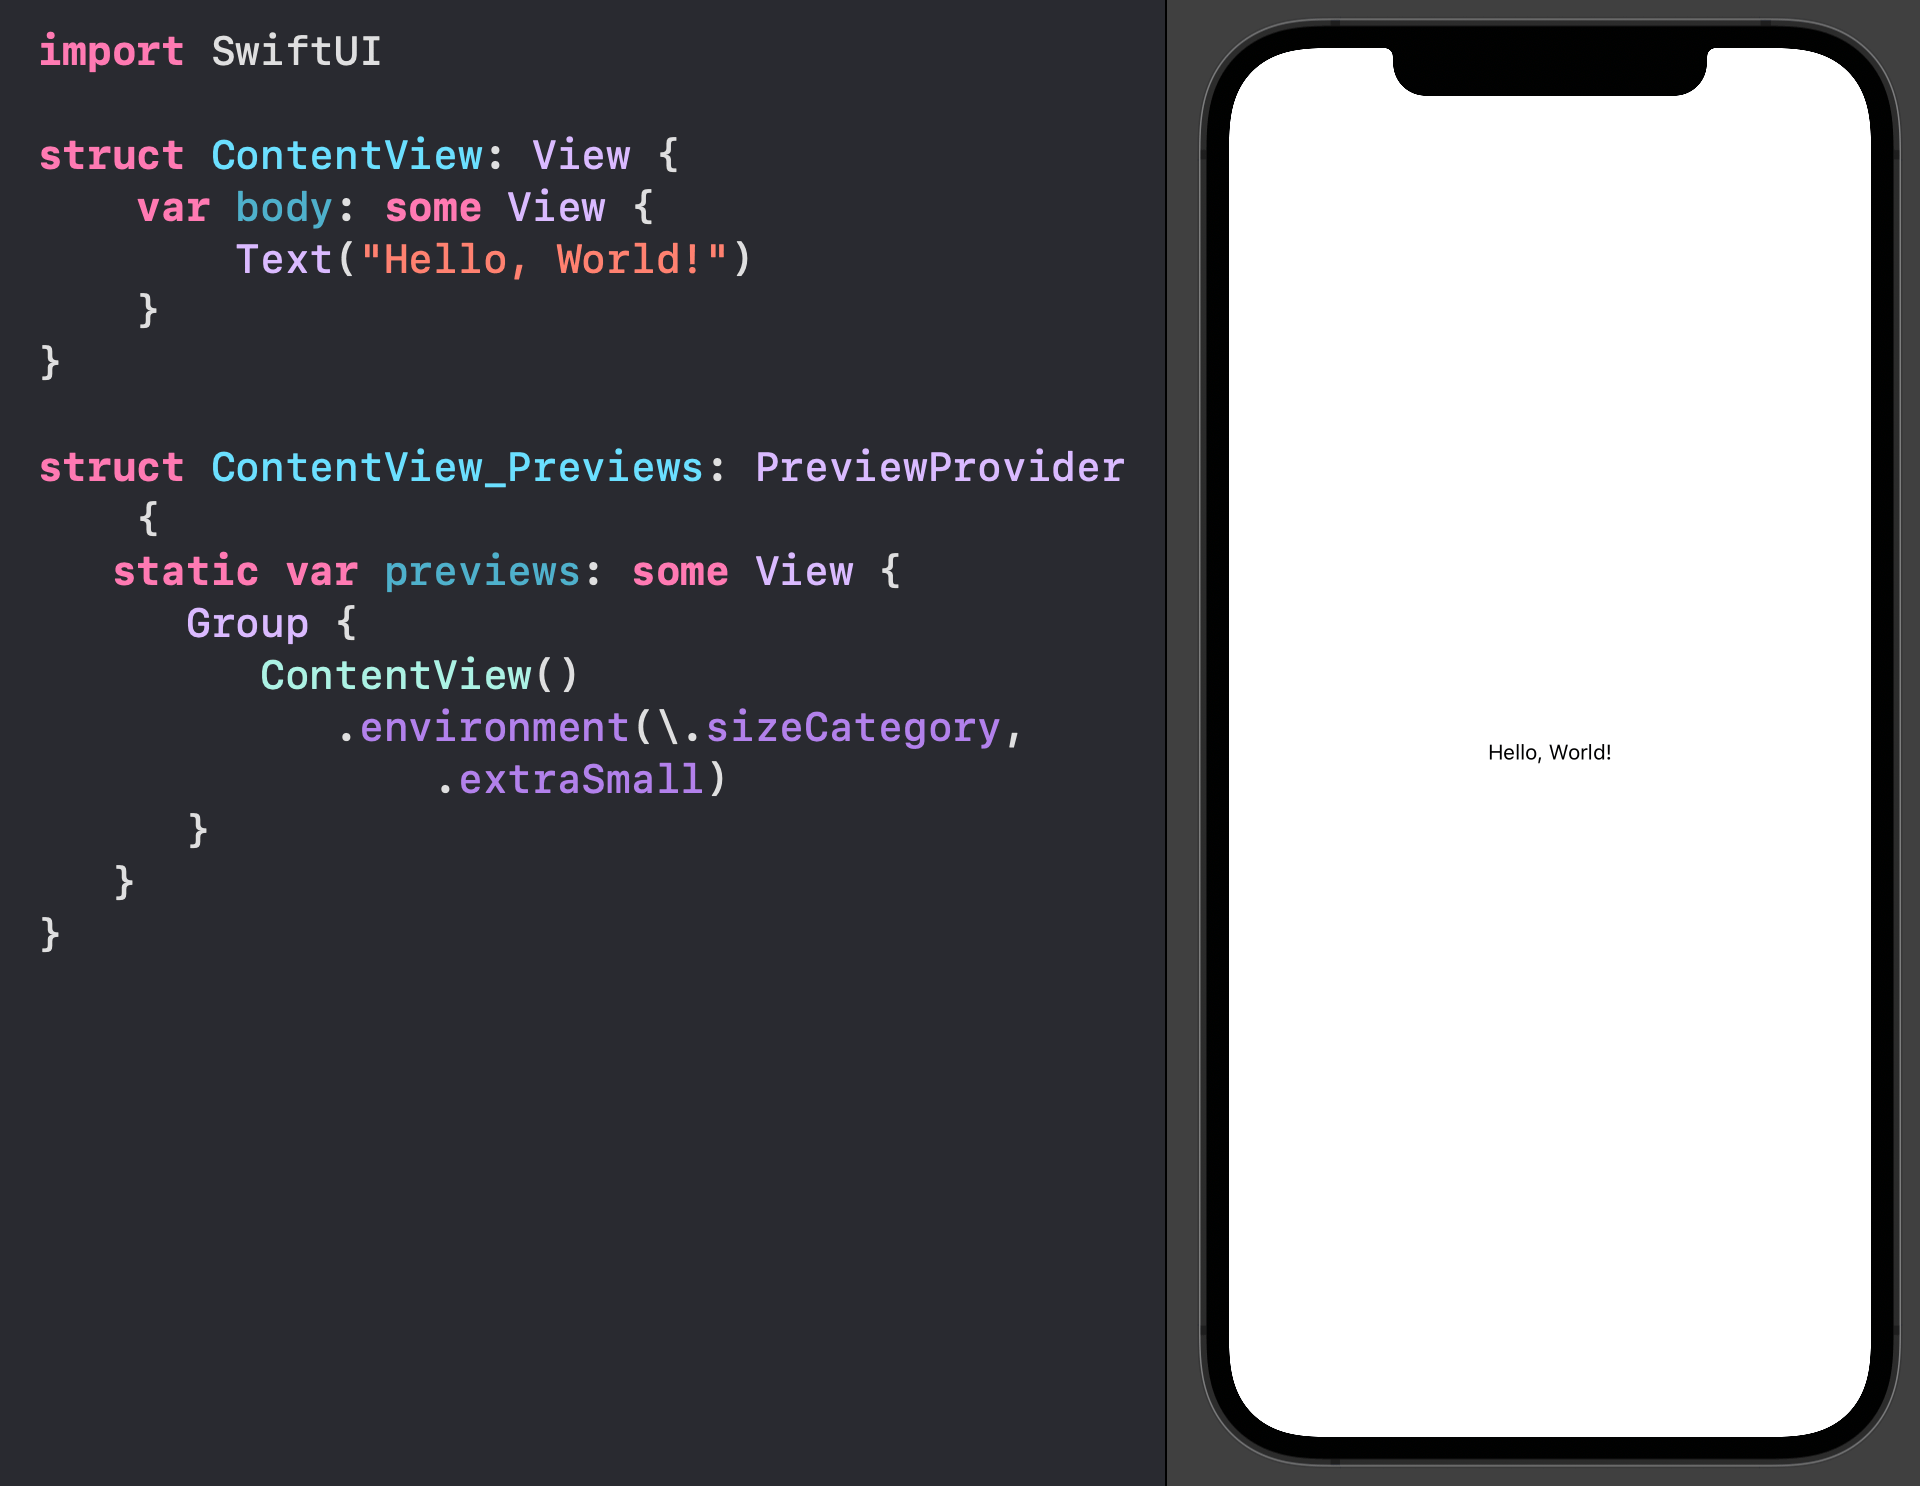 The Xcode Preview showing some very small text.